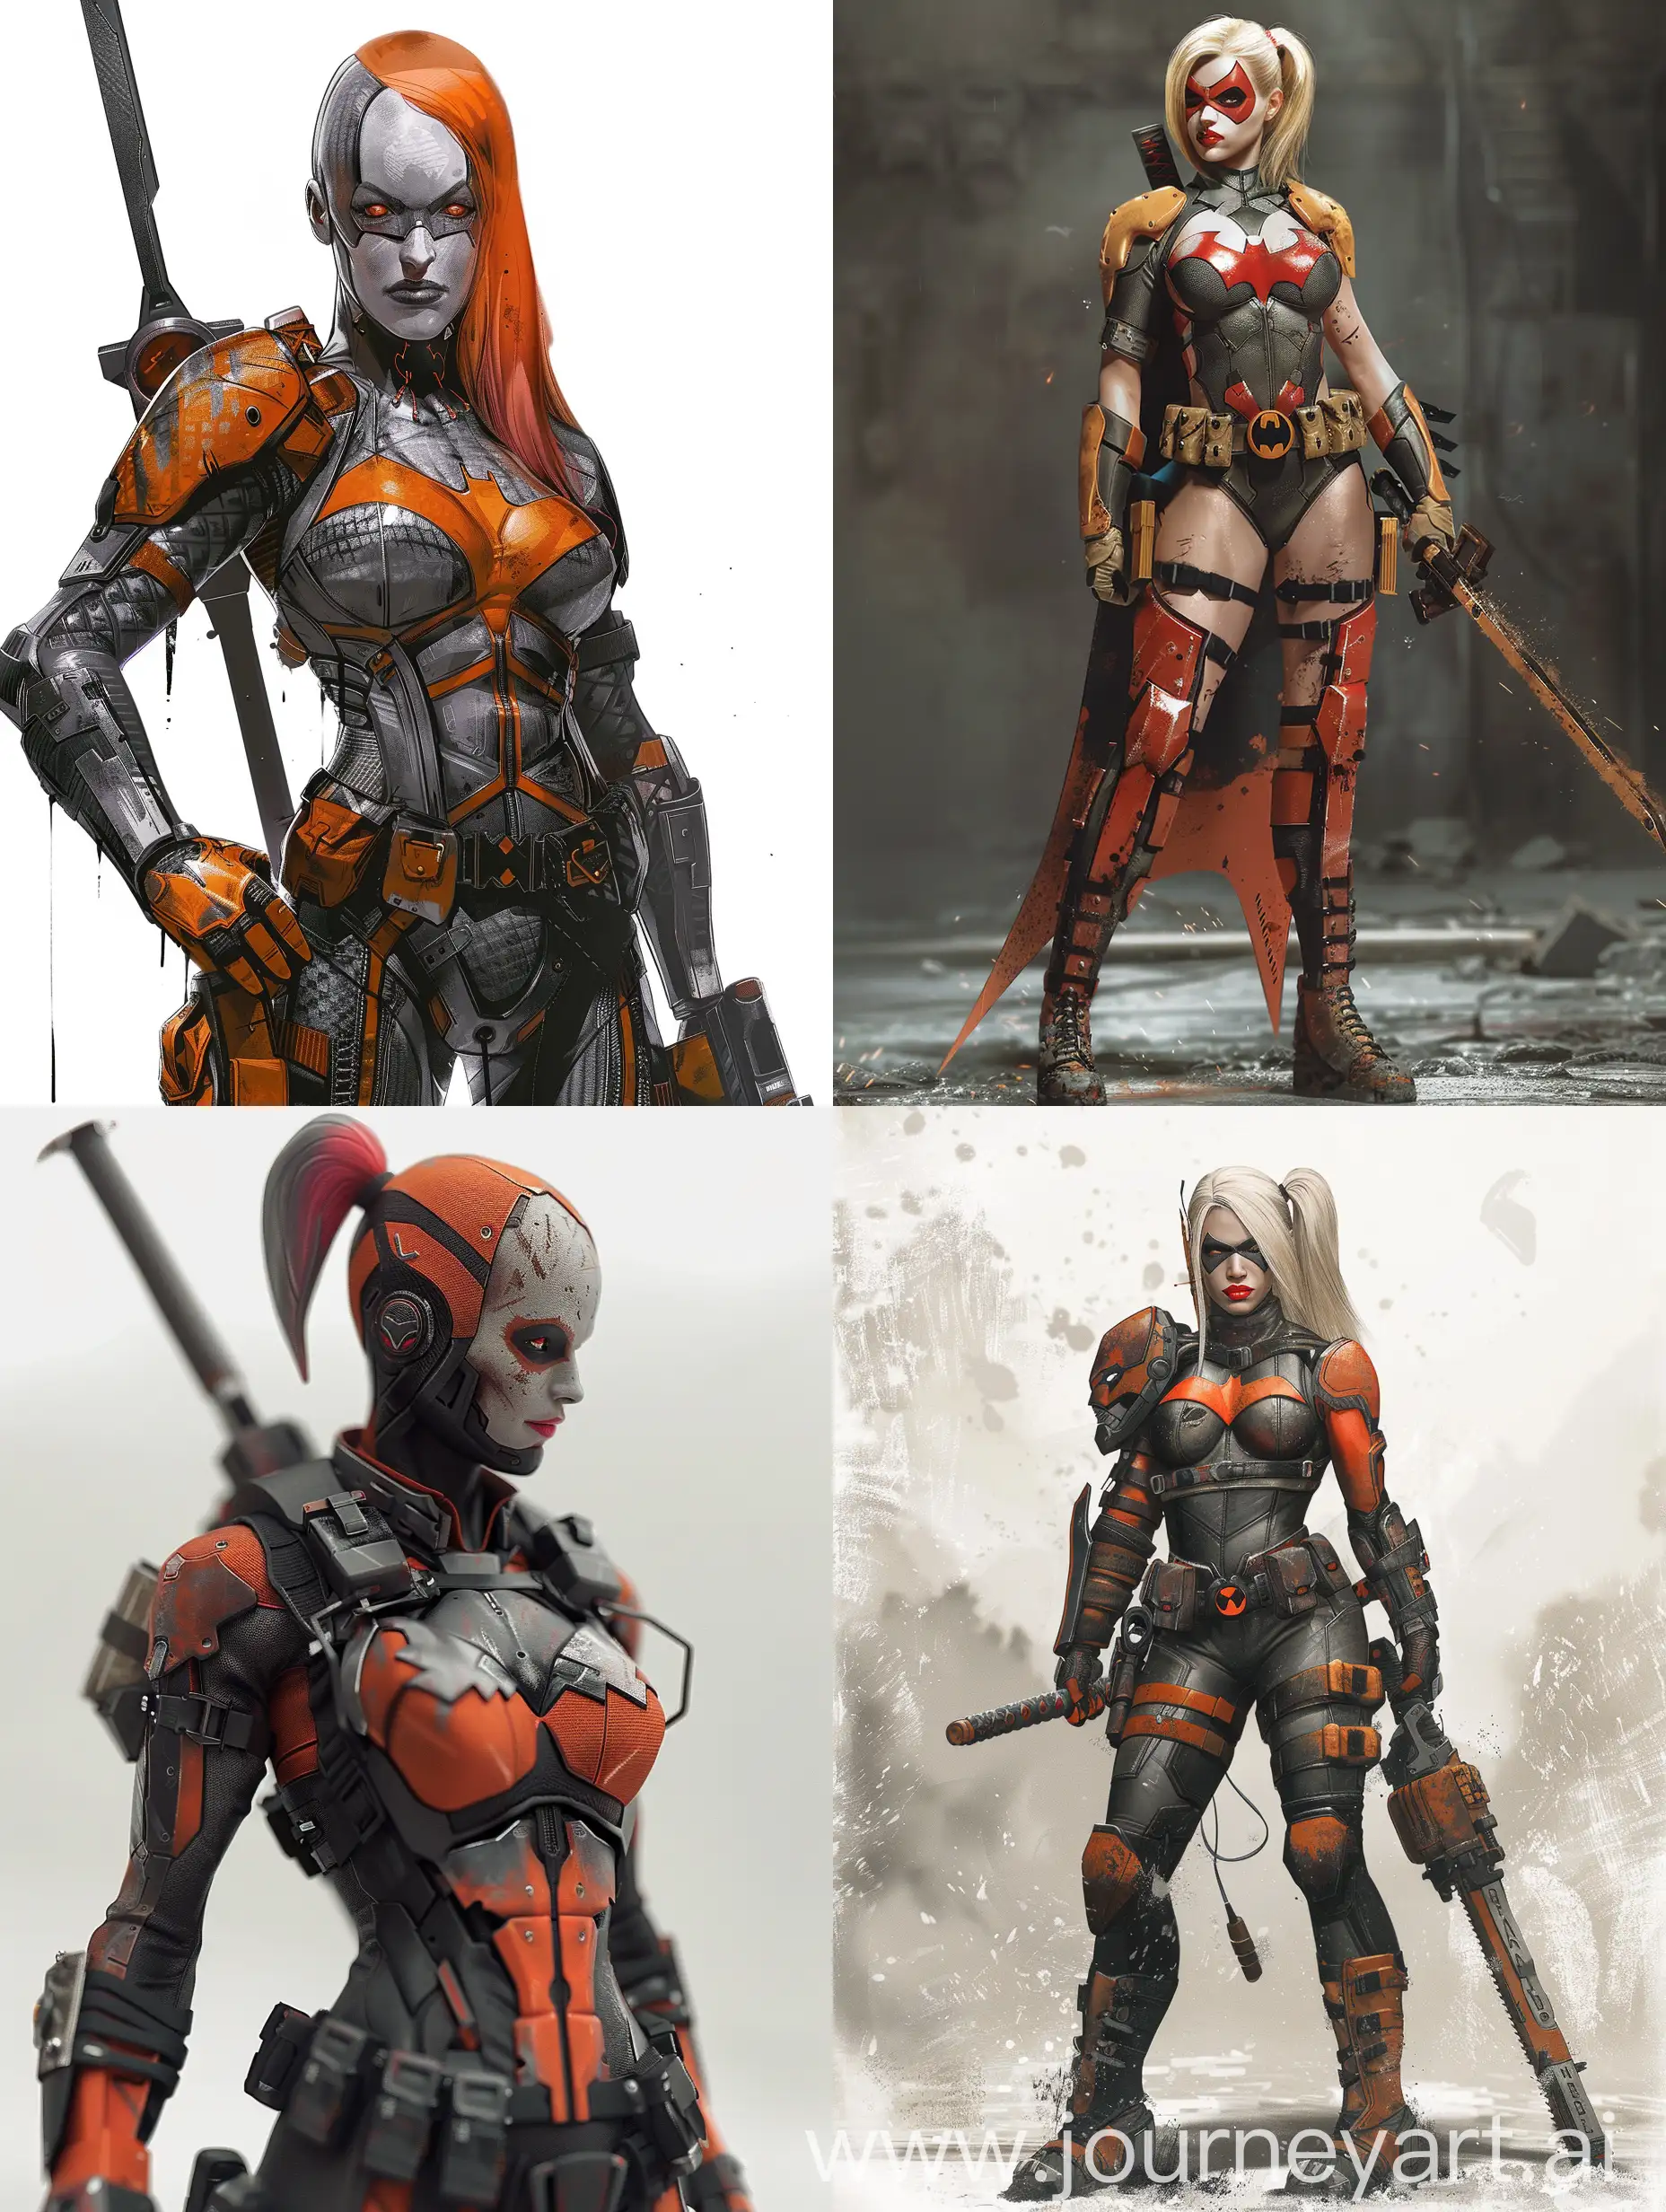 Realistic-Harley-Quinn-and-Deathstroke-Fusion-Artwork-in-High-Definition